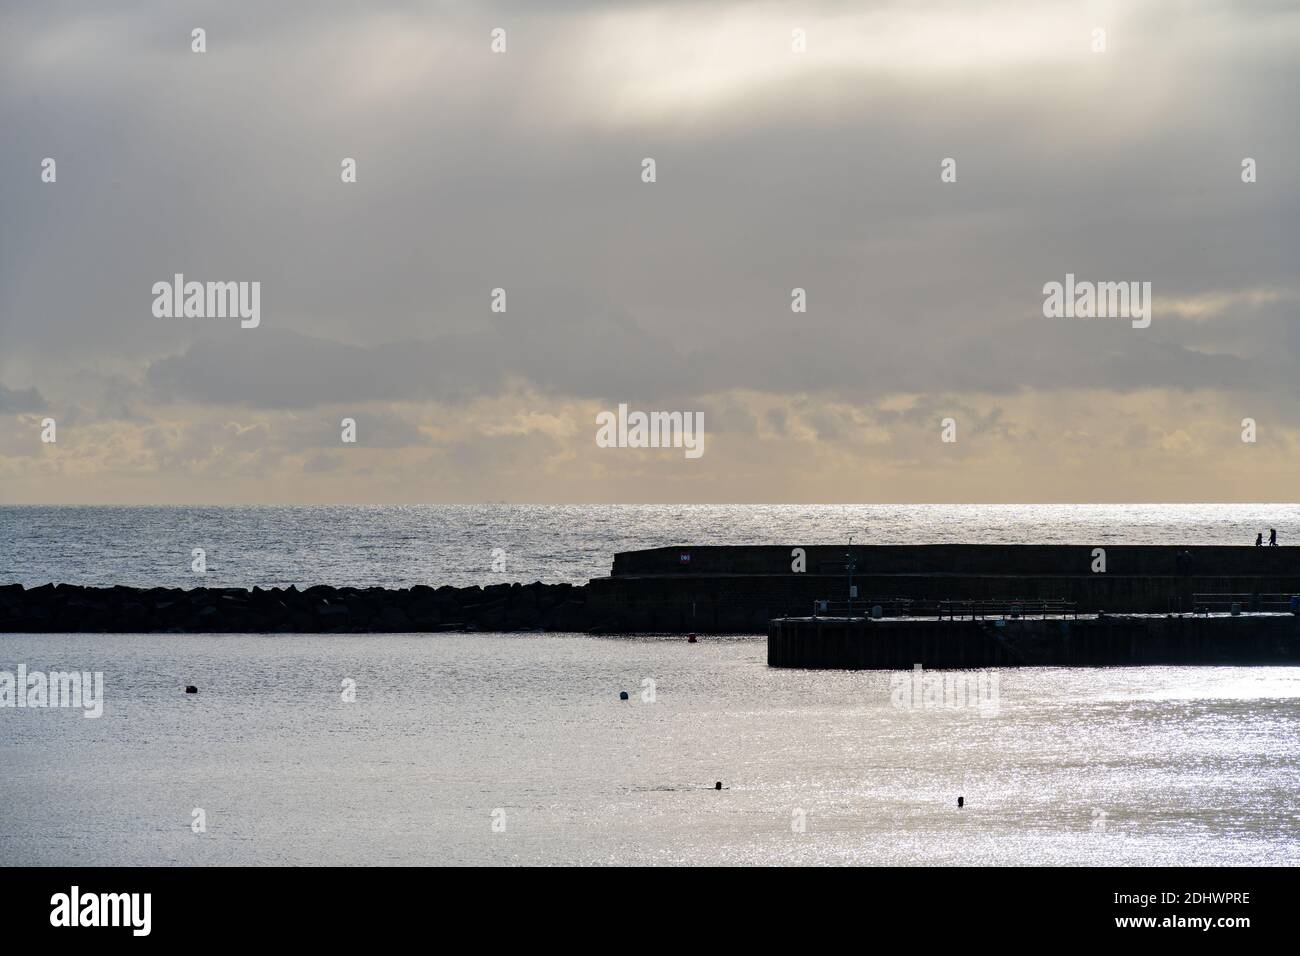 Lyme Regis, Dorset, UK. 12th Dec, 2020. UK Weather: A weather front moves in after a bright, sunny morning at the coastal resort town of Lyme Regis. Credit: Celia McMahon/Alamy Live News Stock Photo